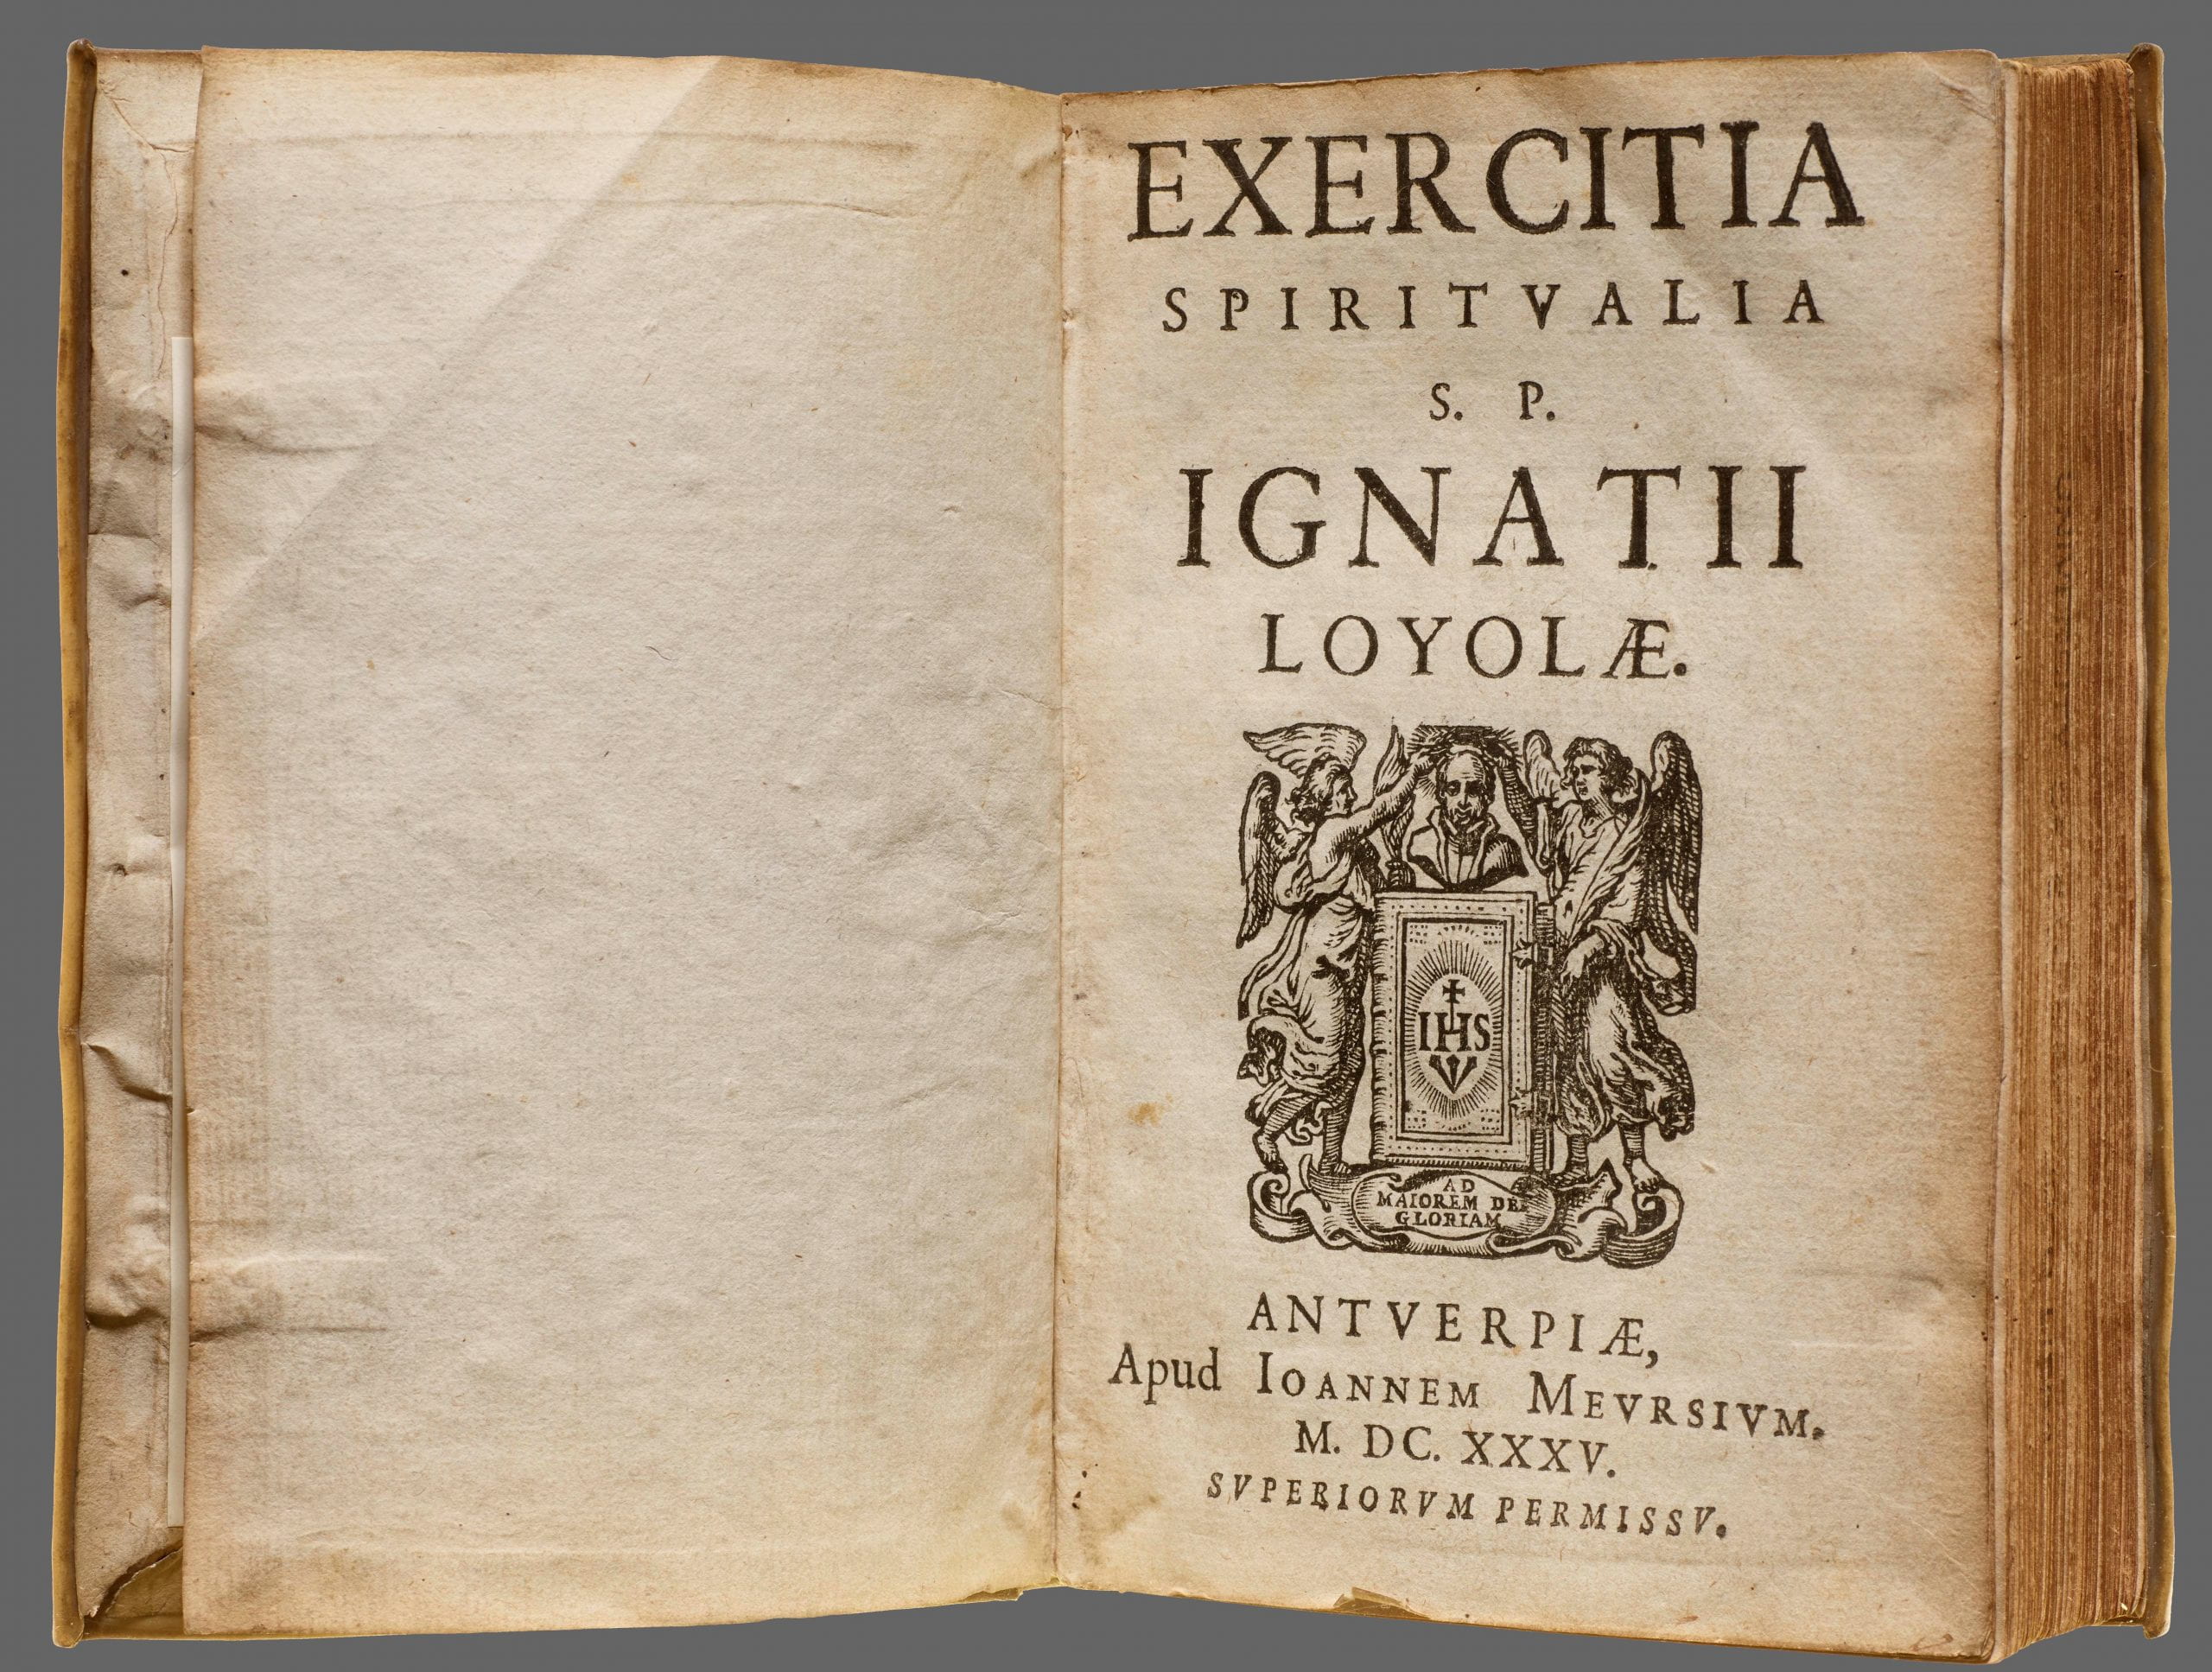 Digitized Early Editions of The Spiritual Exercises now available online